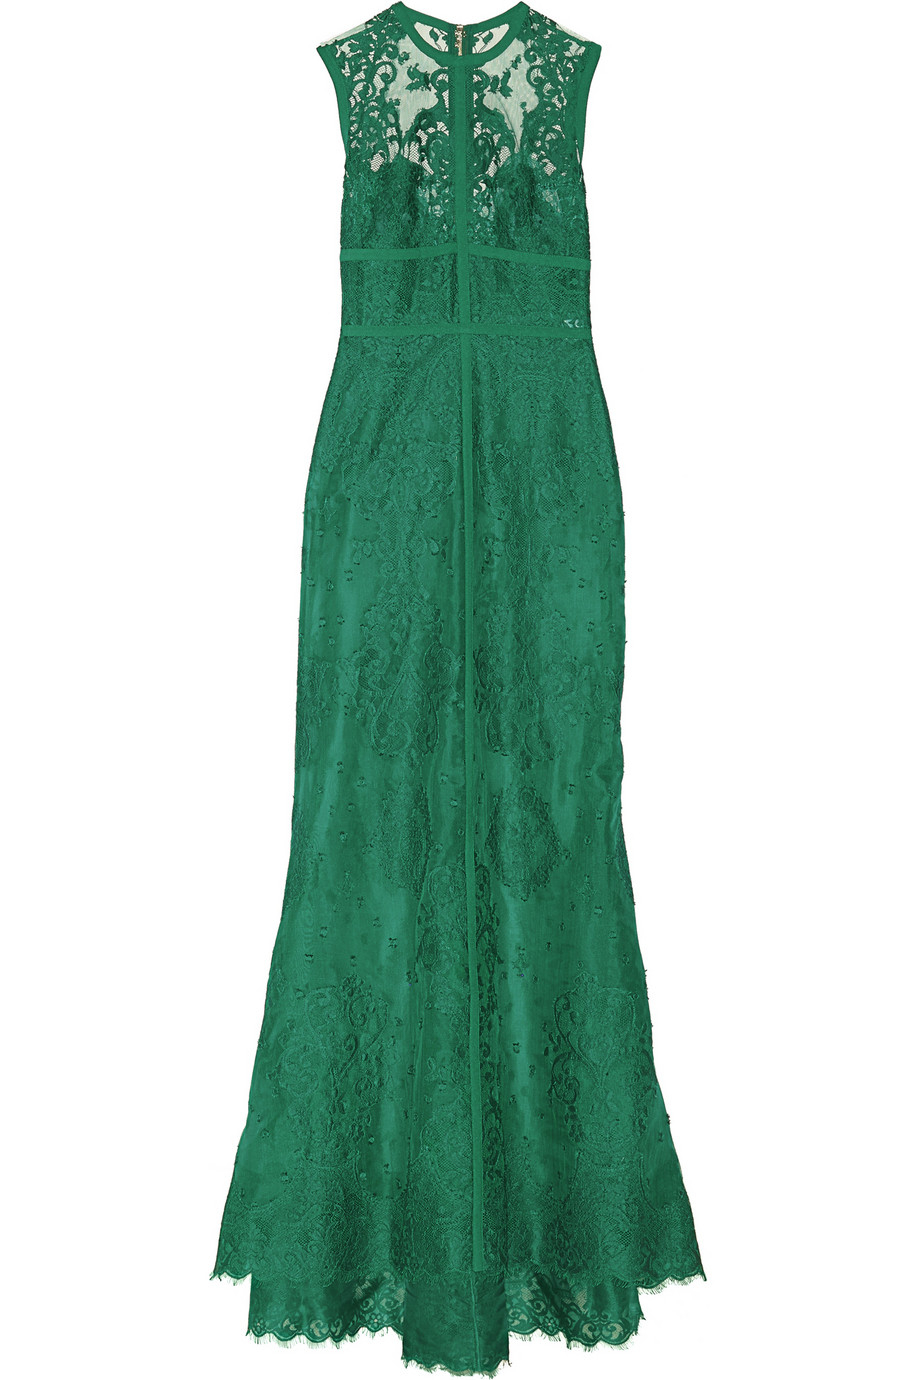 Lyst - Elie Saab Lace Gown in Green